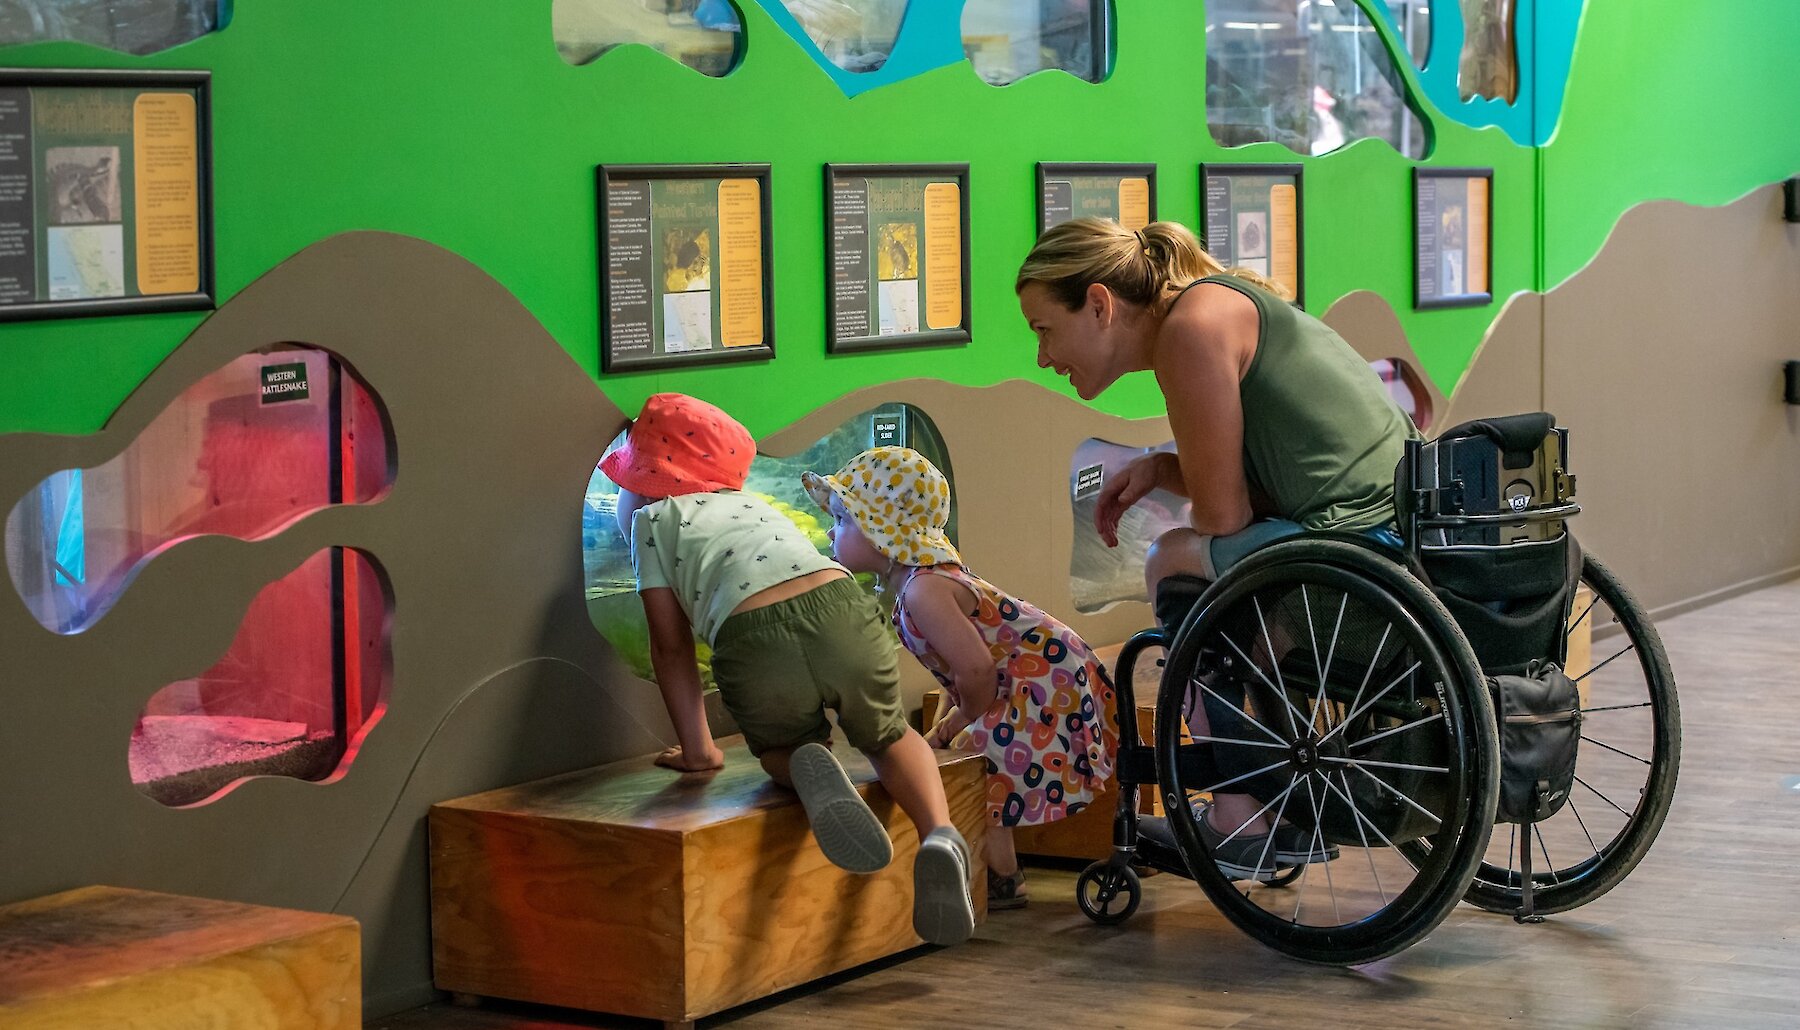 A mother and children observing the accessible reptile exhibit at the BC Wildlife Park in Kamloops, British Columbia.